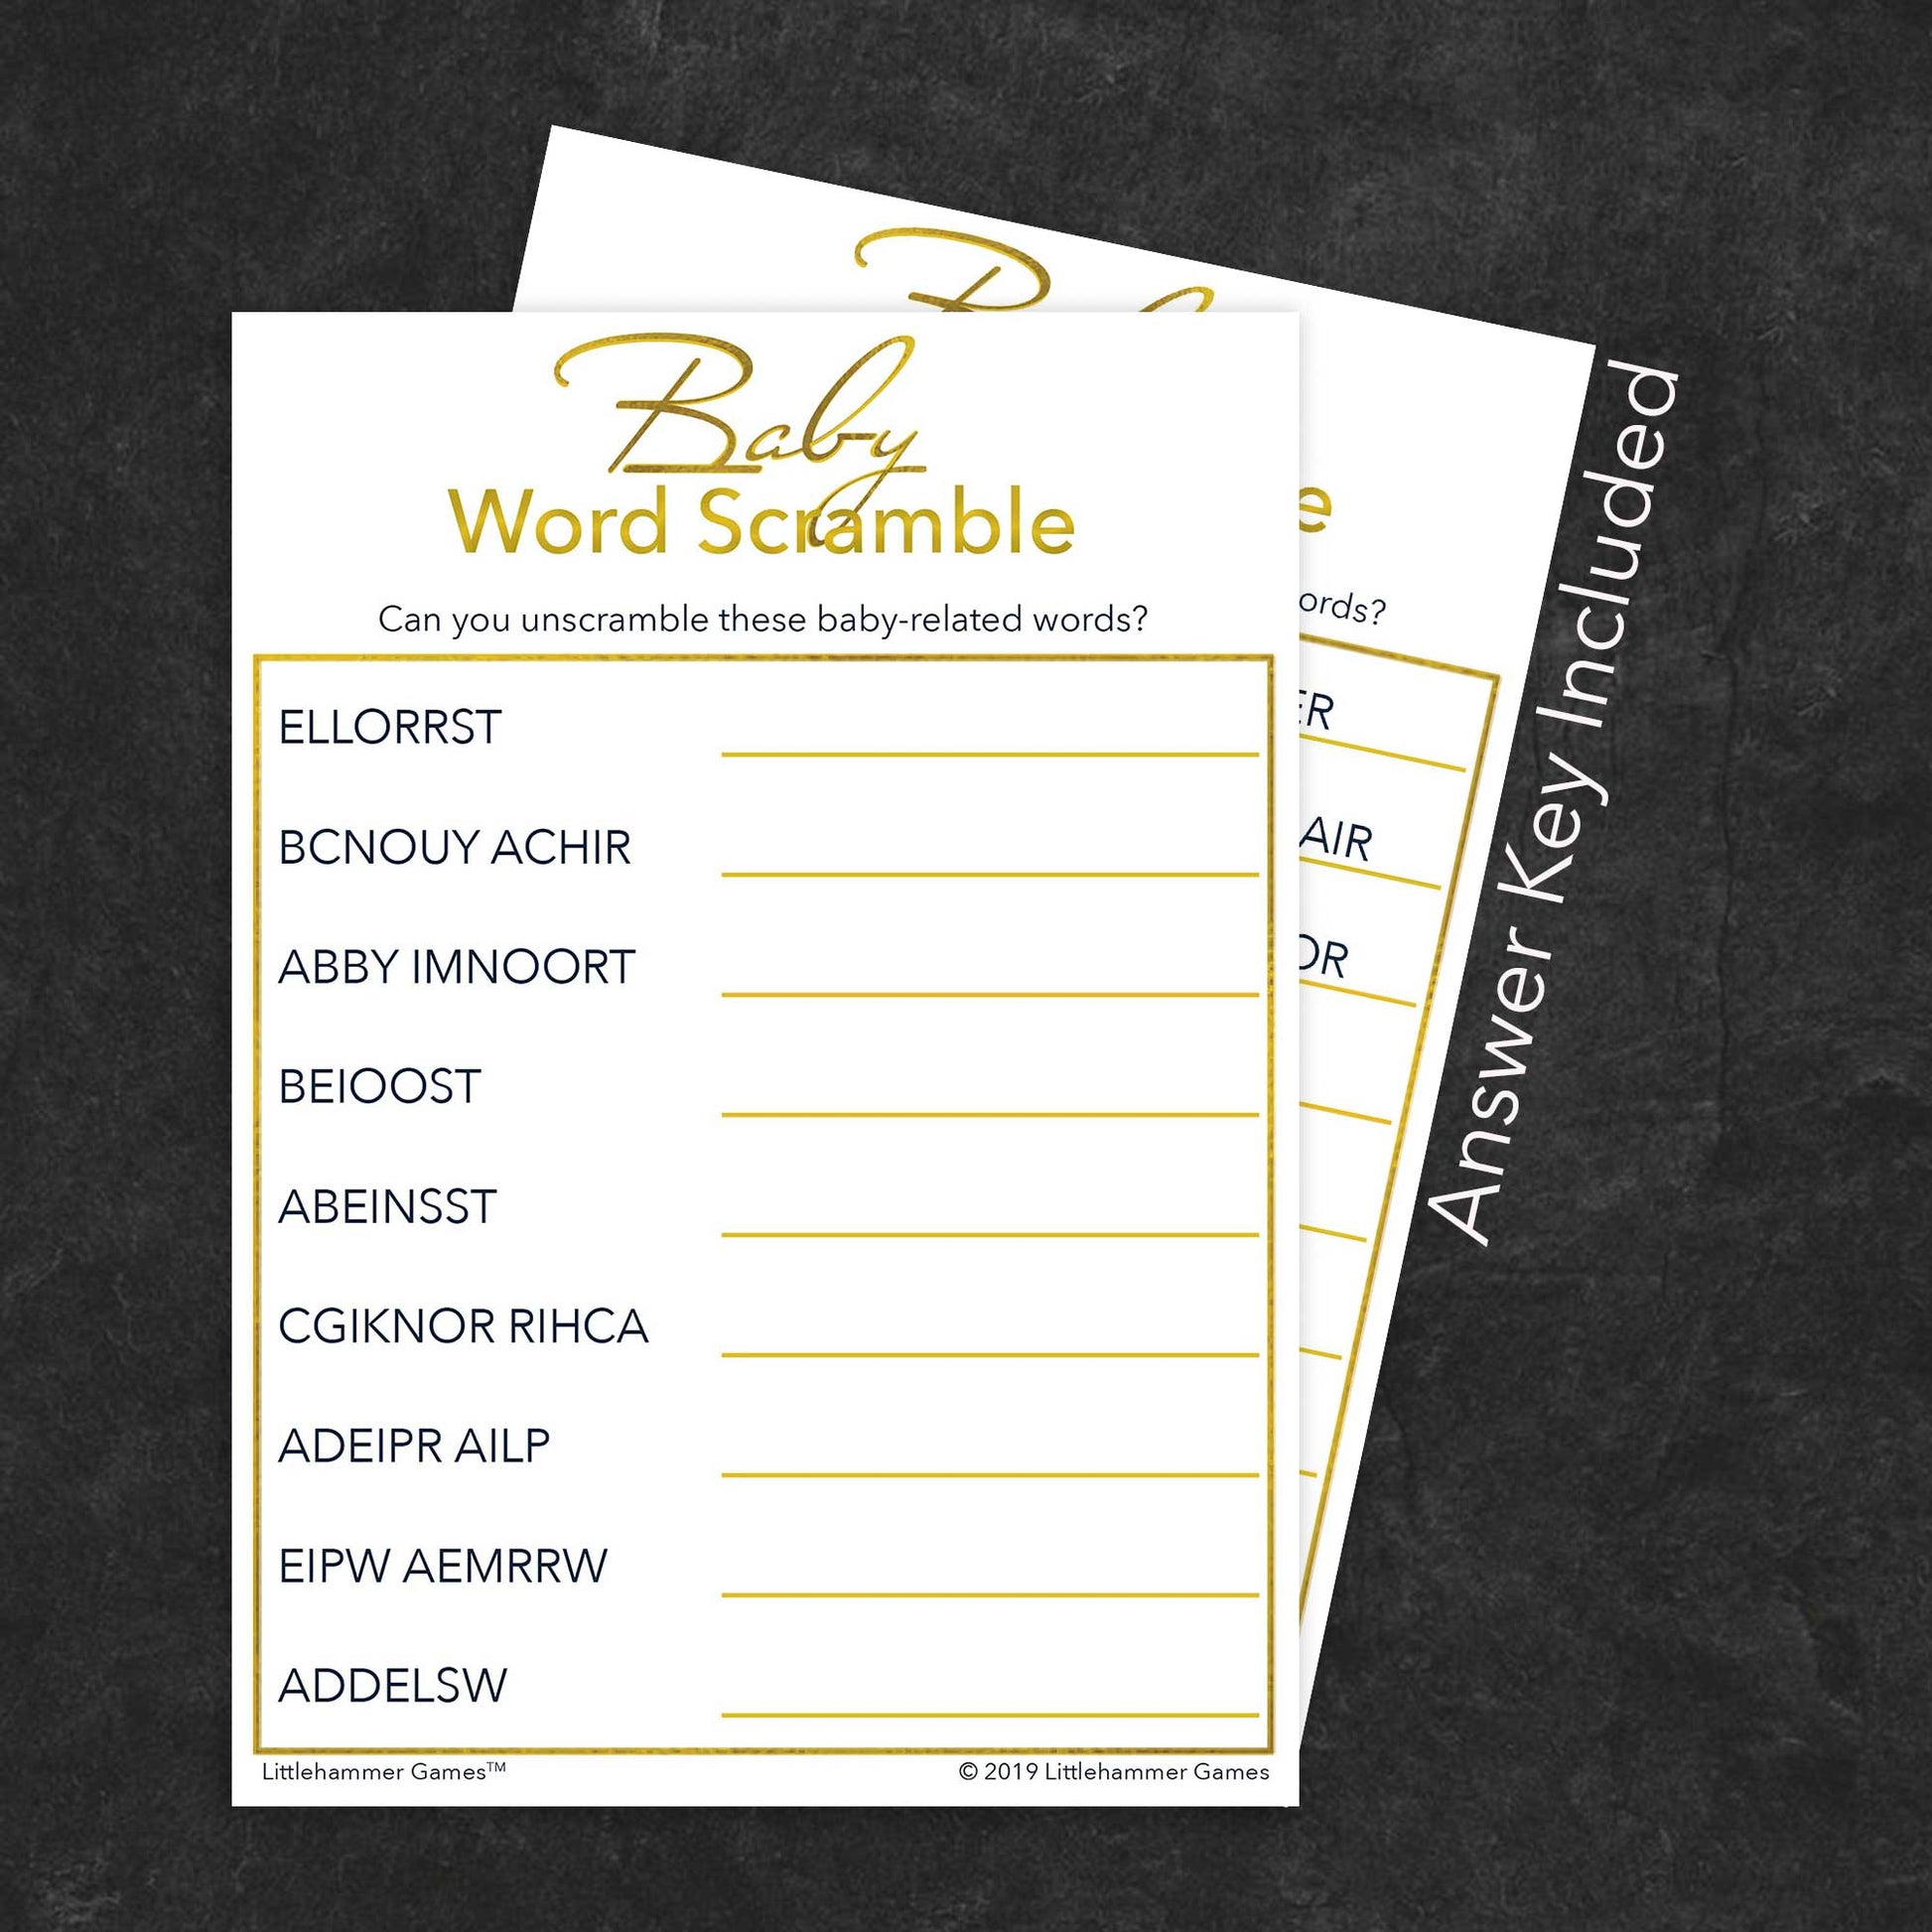 Baby Word Scramble game card with gold text on a white background with answer card tucked behind it on a slate background with white text that says "Answer Key Included"